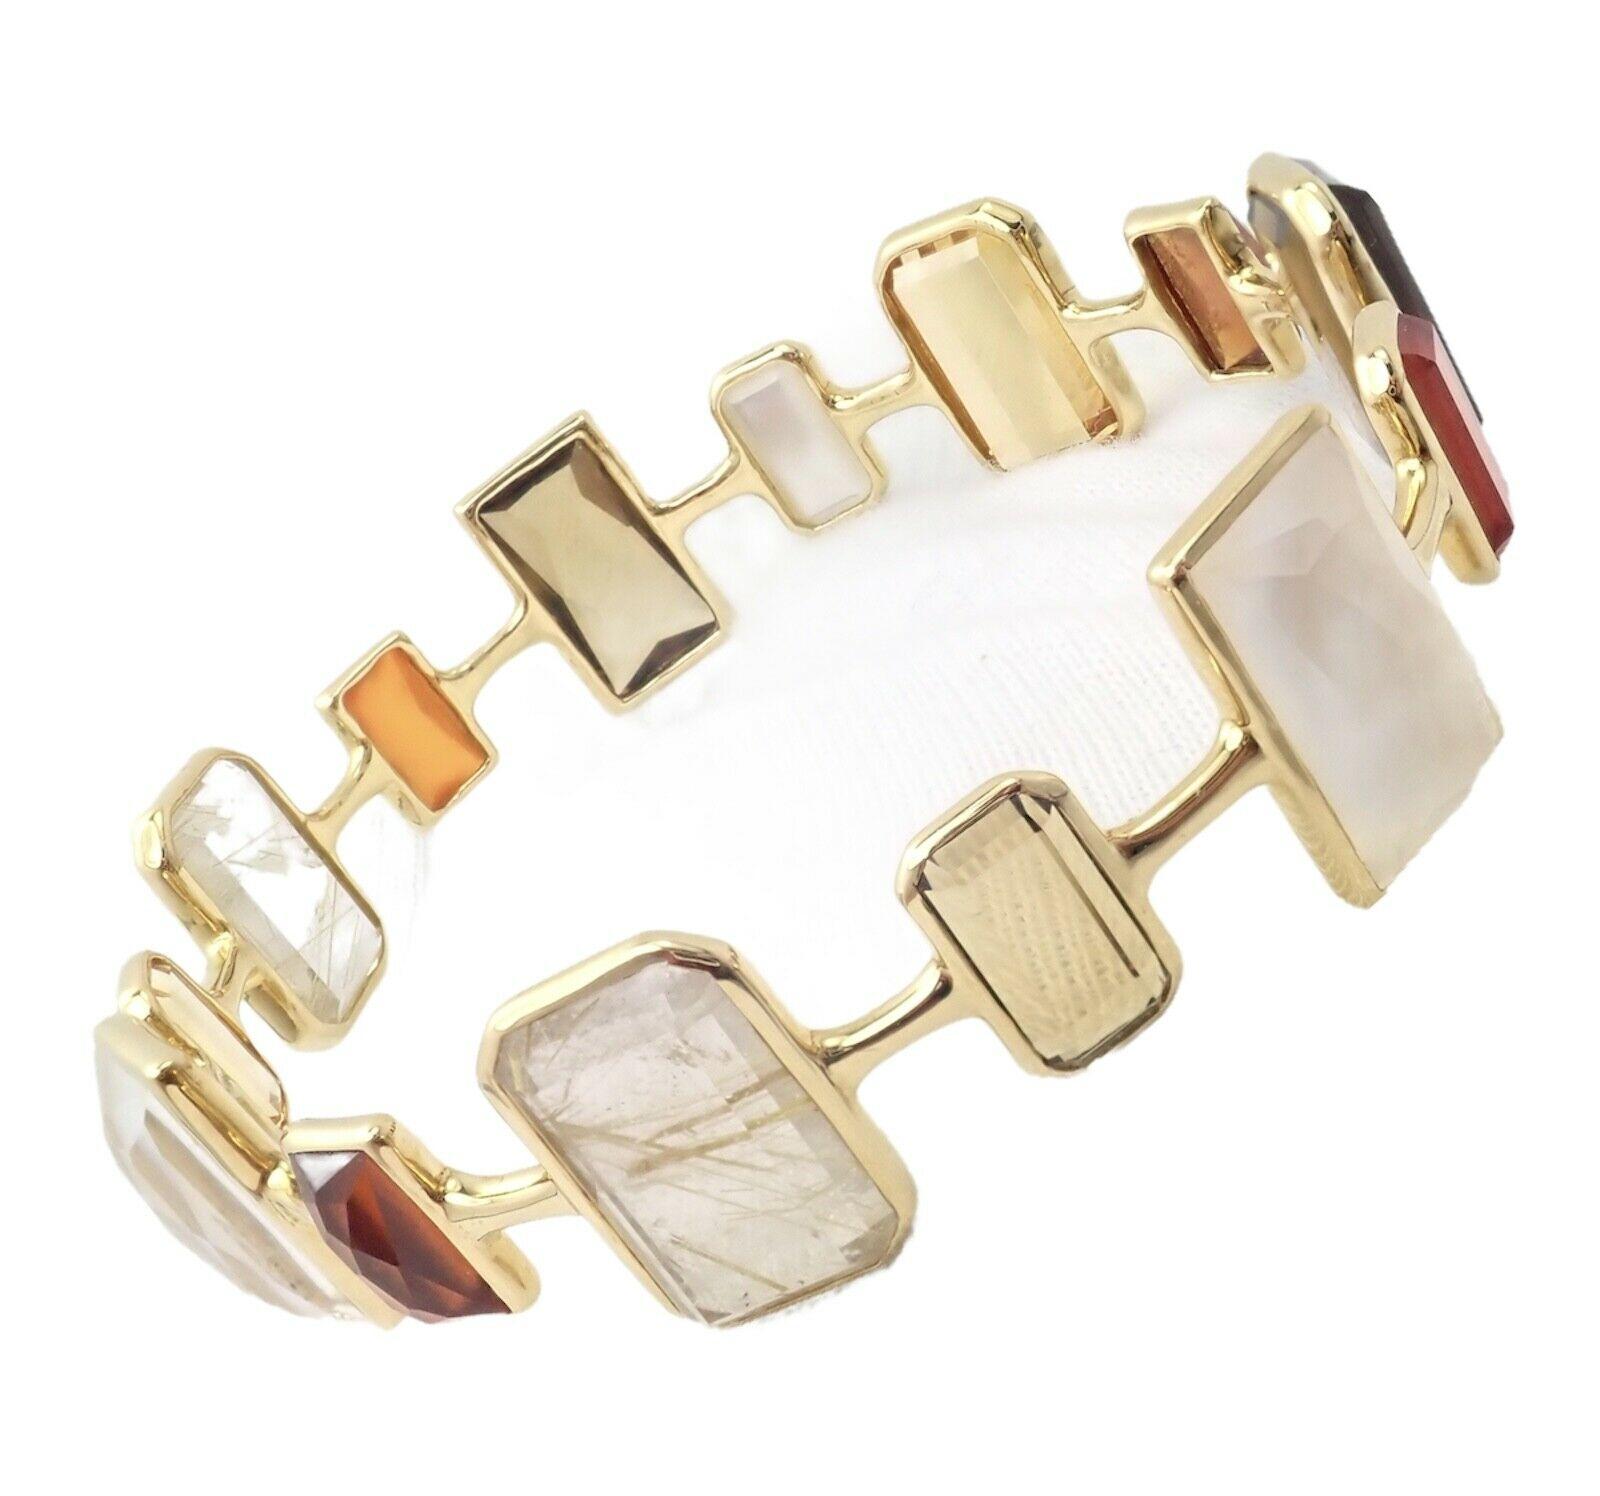 18k Yellow Gold Rock Candy Newport Large Quartz Bangle Bracelet by Ippolita. 
With Large Stones Of Various Sizes - Mother of Pearl, Rutelated Quartz, Smokey Quartz, and many more stones
Details: 
Length: 7.5